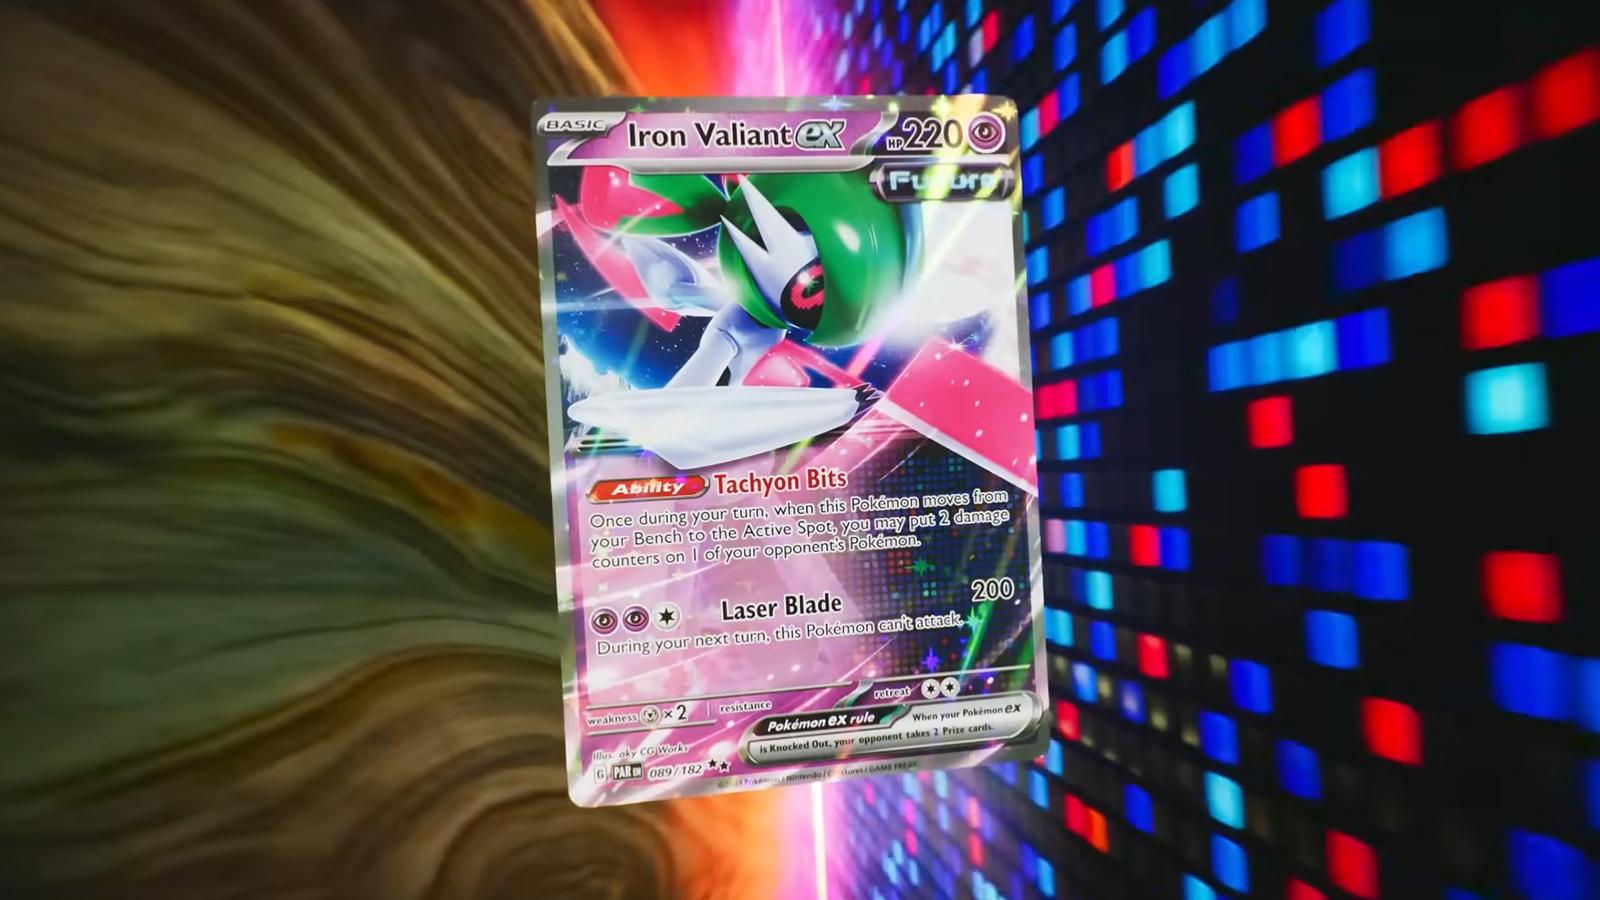 Iron Valiant appearing in the Pokemon TCG Paradox Rift expansion